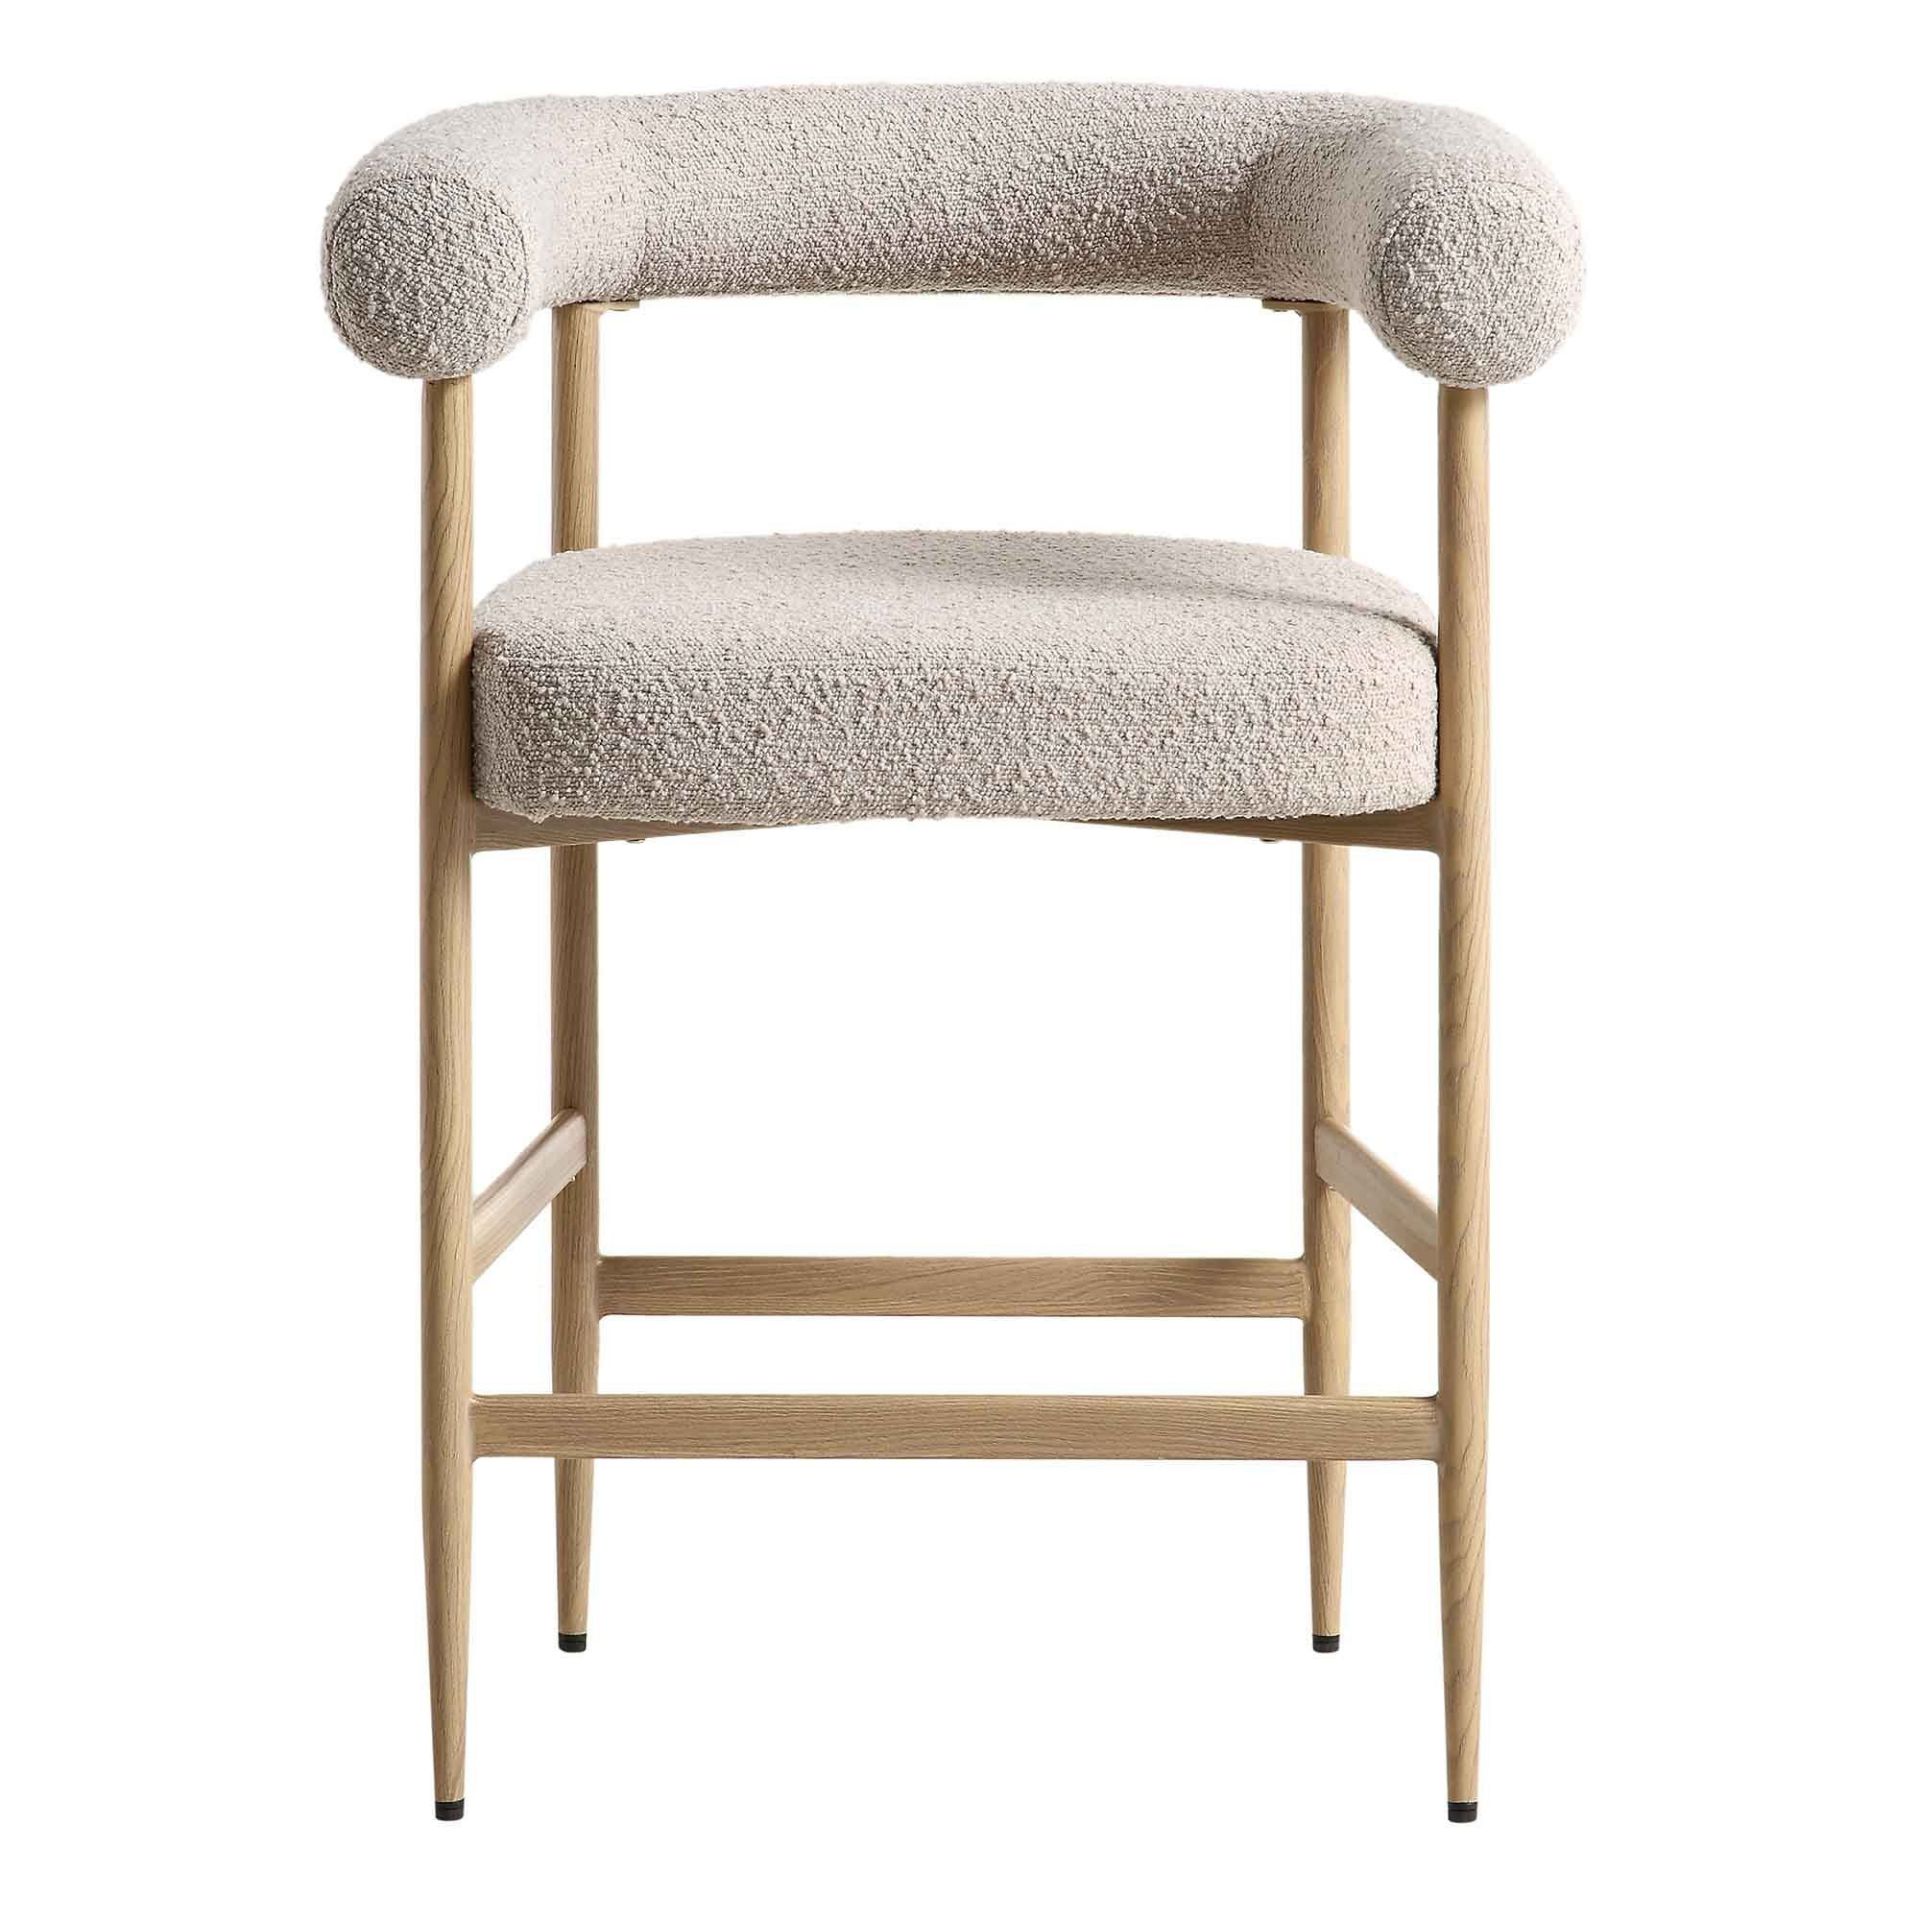 Fulbourn Taupe Boucle Counter Stool with Natural Wood Effect Legs. - ER29. RRP £199.99. A cheerful - Image 4 of 4